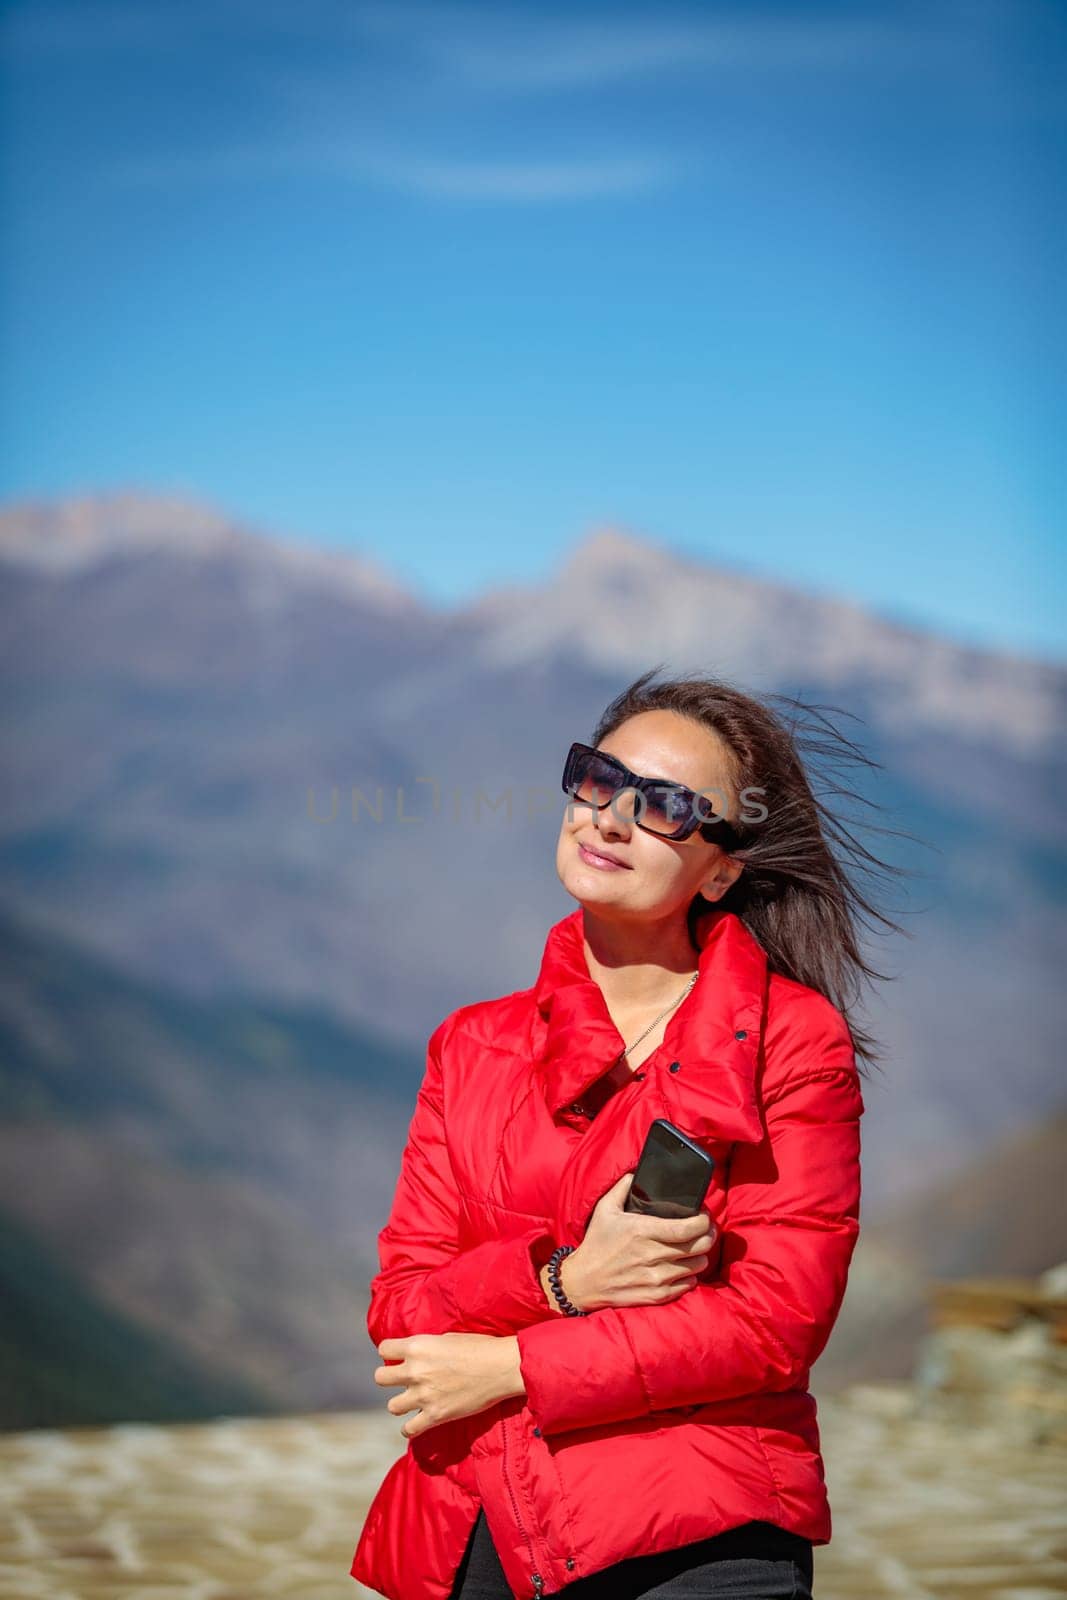 Young beauty posing in front of a snow-capped mountain peak